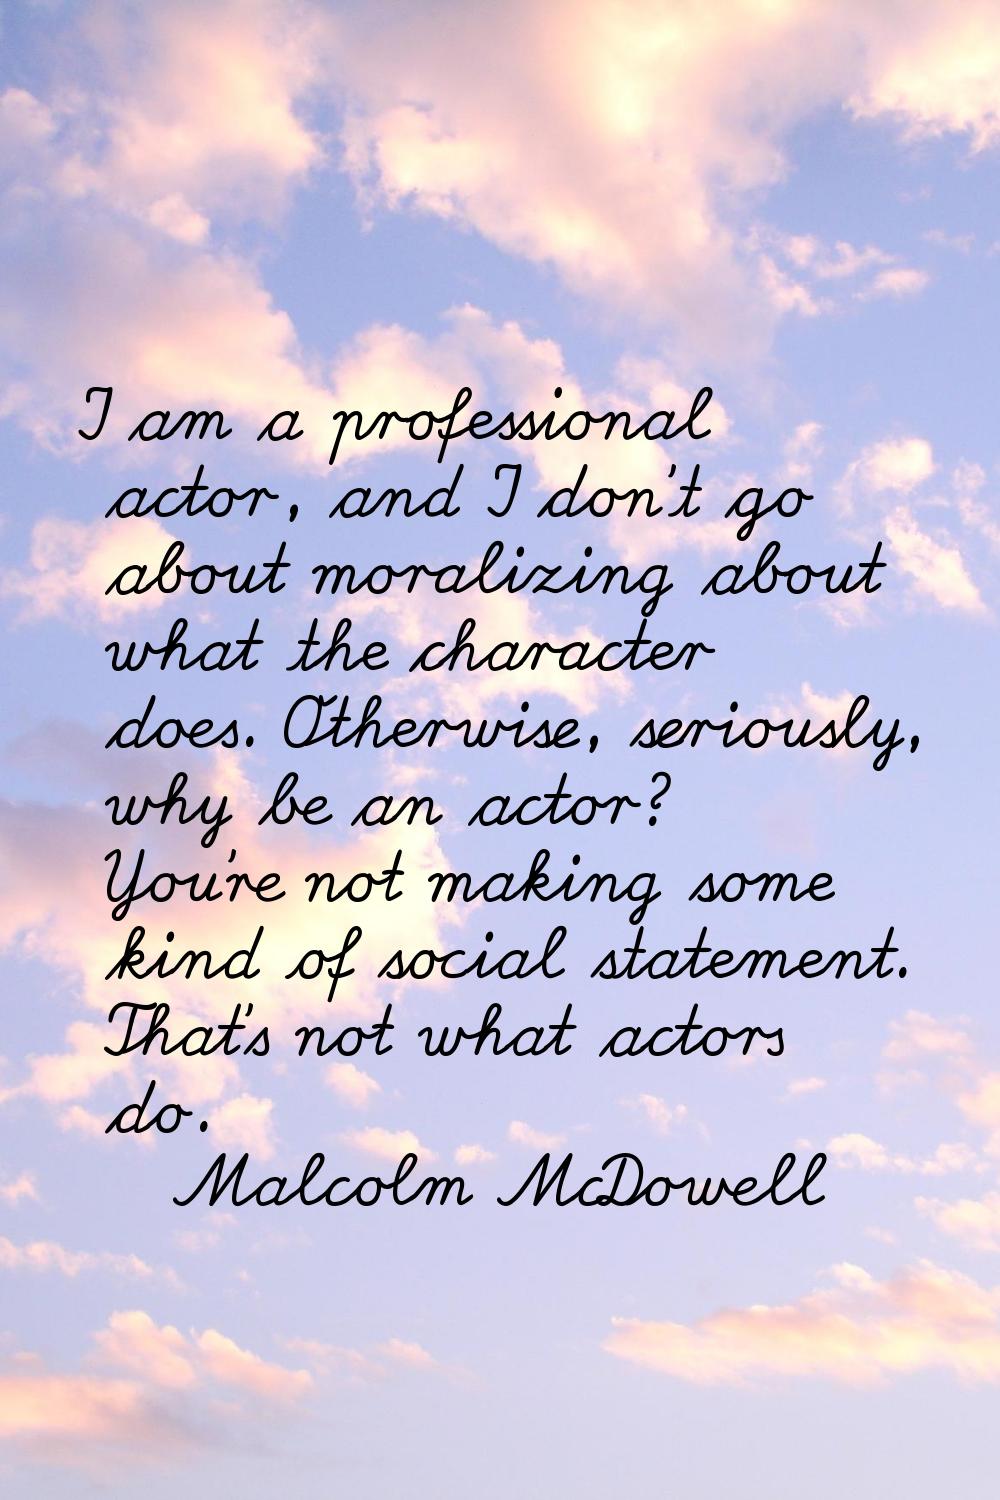 I am a professional actor, and I don't go about moralizing about what the character does. Otherwise